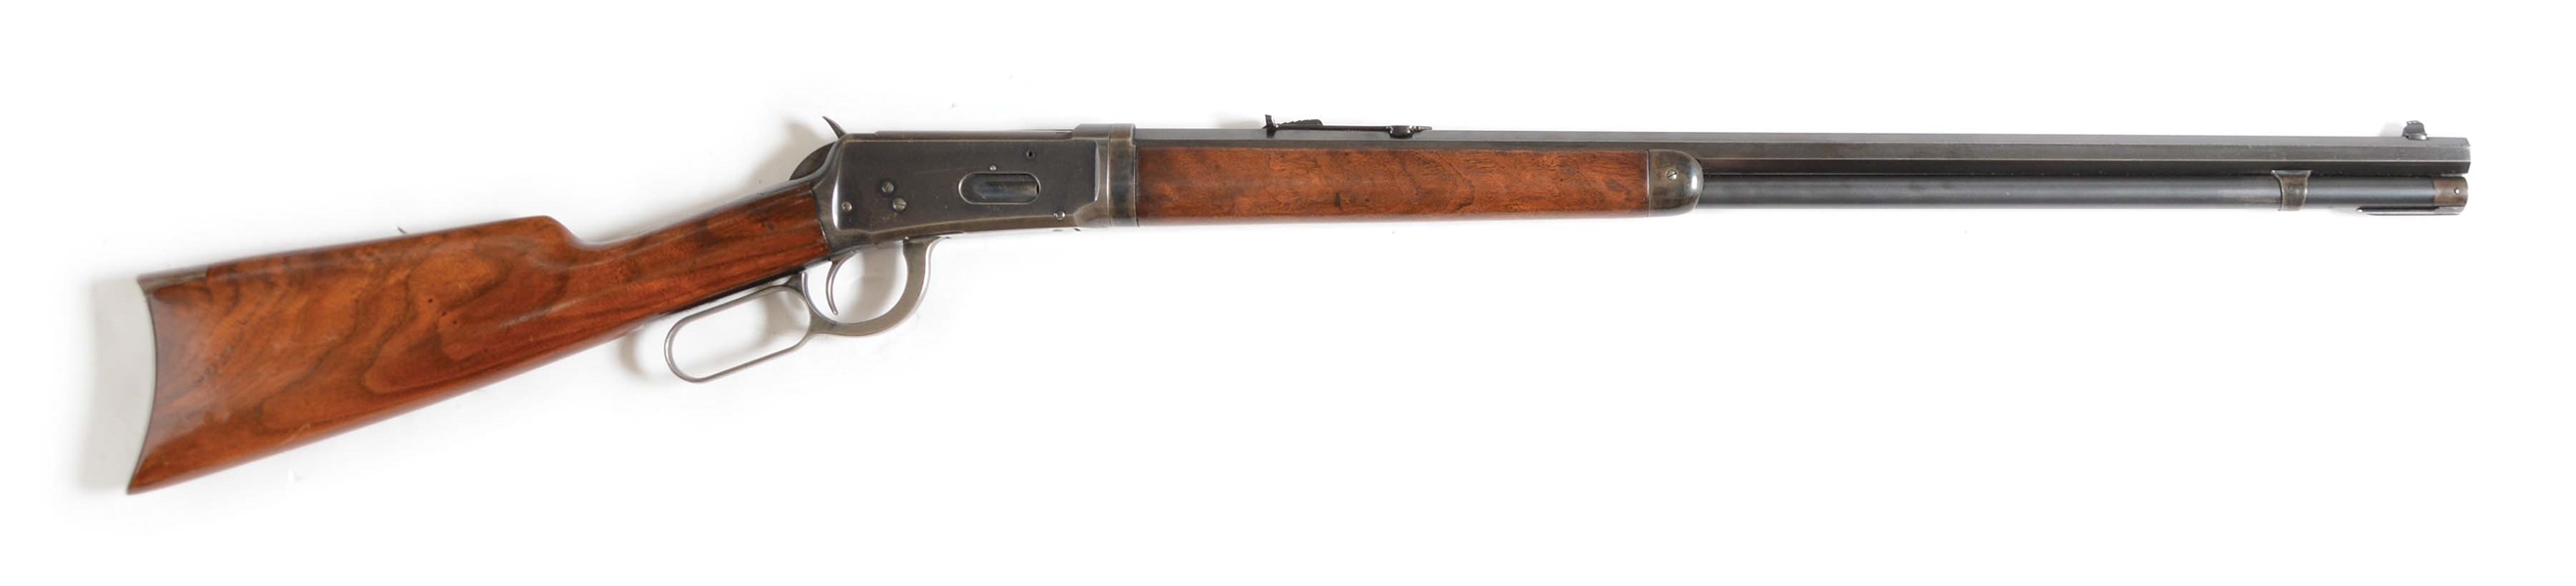 (C) FINE WICHESSTER MODEL 1894 TAKEDOWN LEVER ACTION RIFLE (1902).